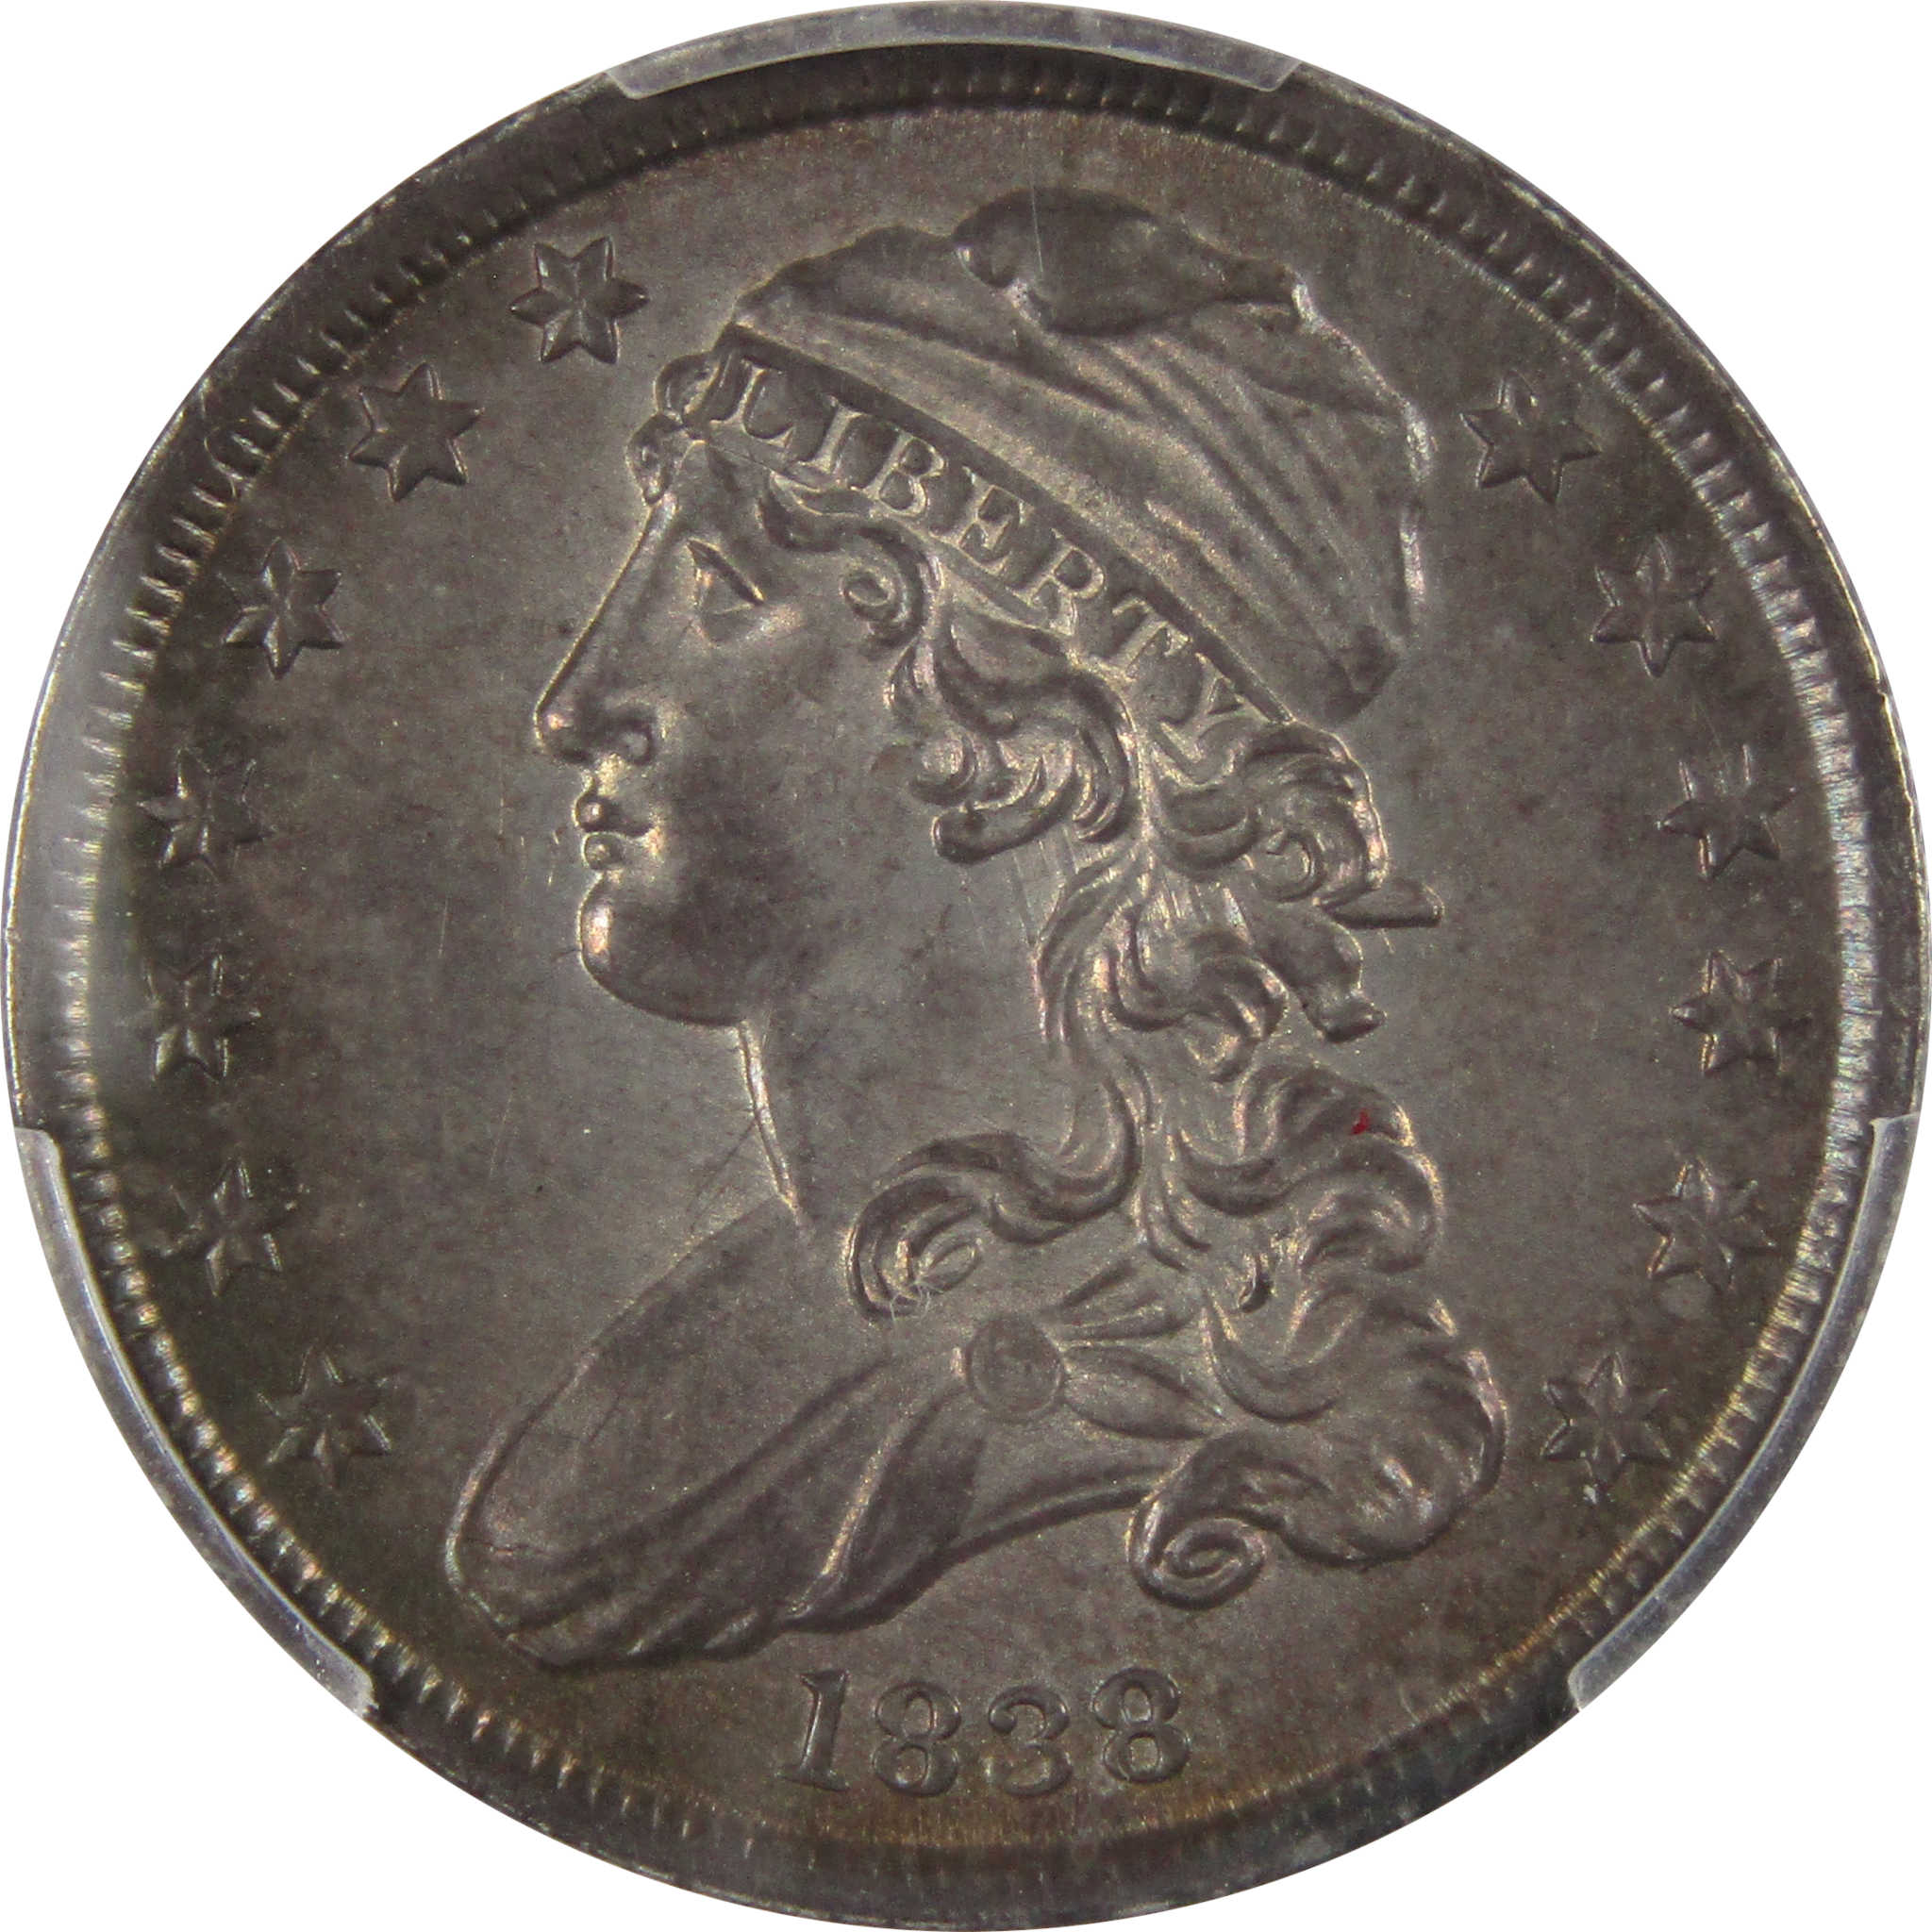 1838 Capped Bust Quarter About Uncirculated Details PCGS SKU:IPC6925